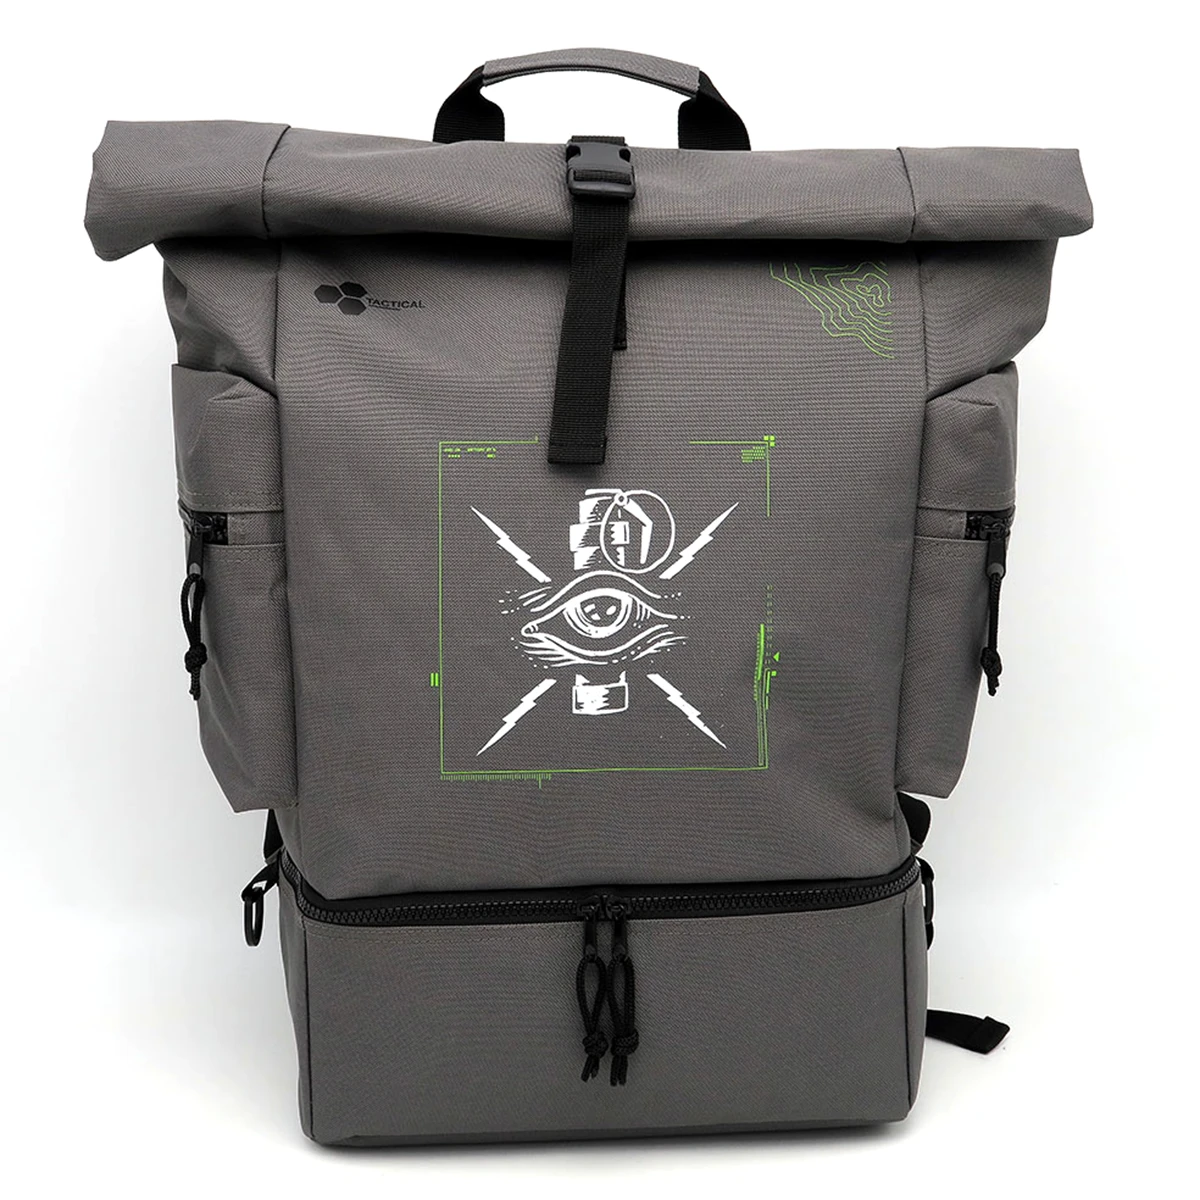 Call of Duty Rolltop Backpack "Blind" Grey Cover